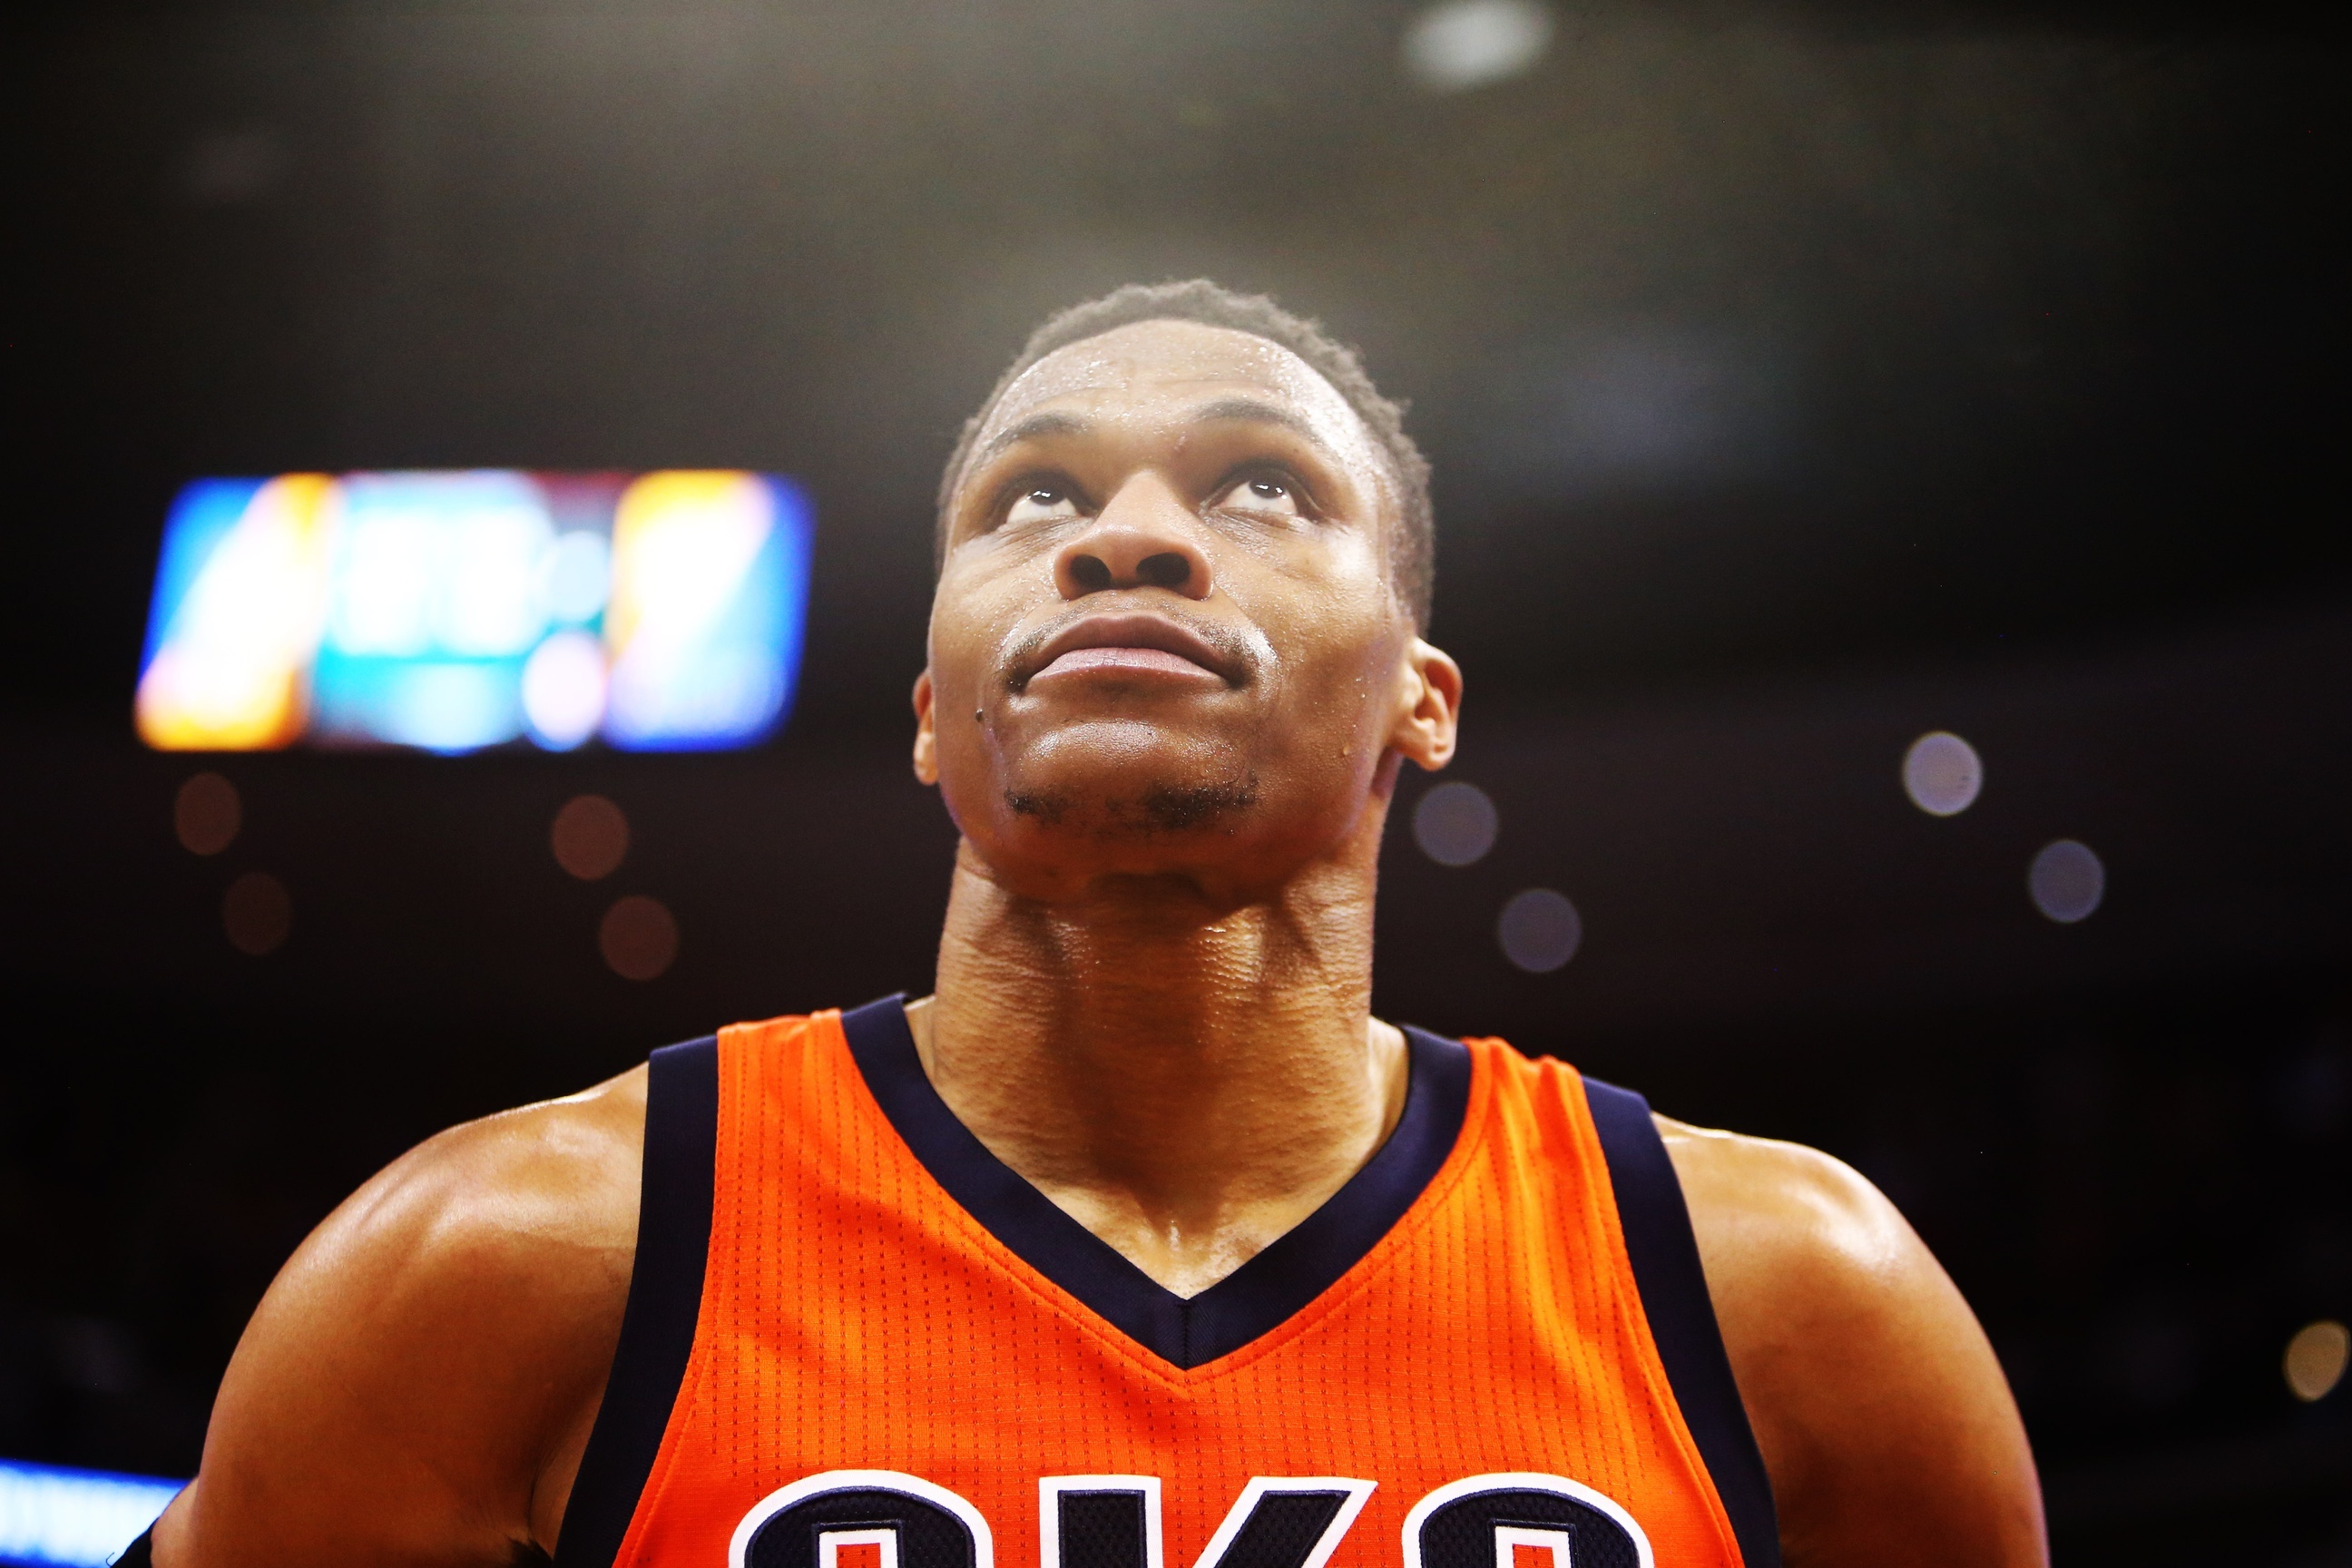 What were Russell Westbrook's stats in his MVP winning year?